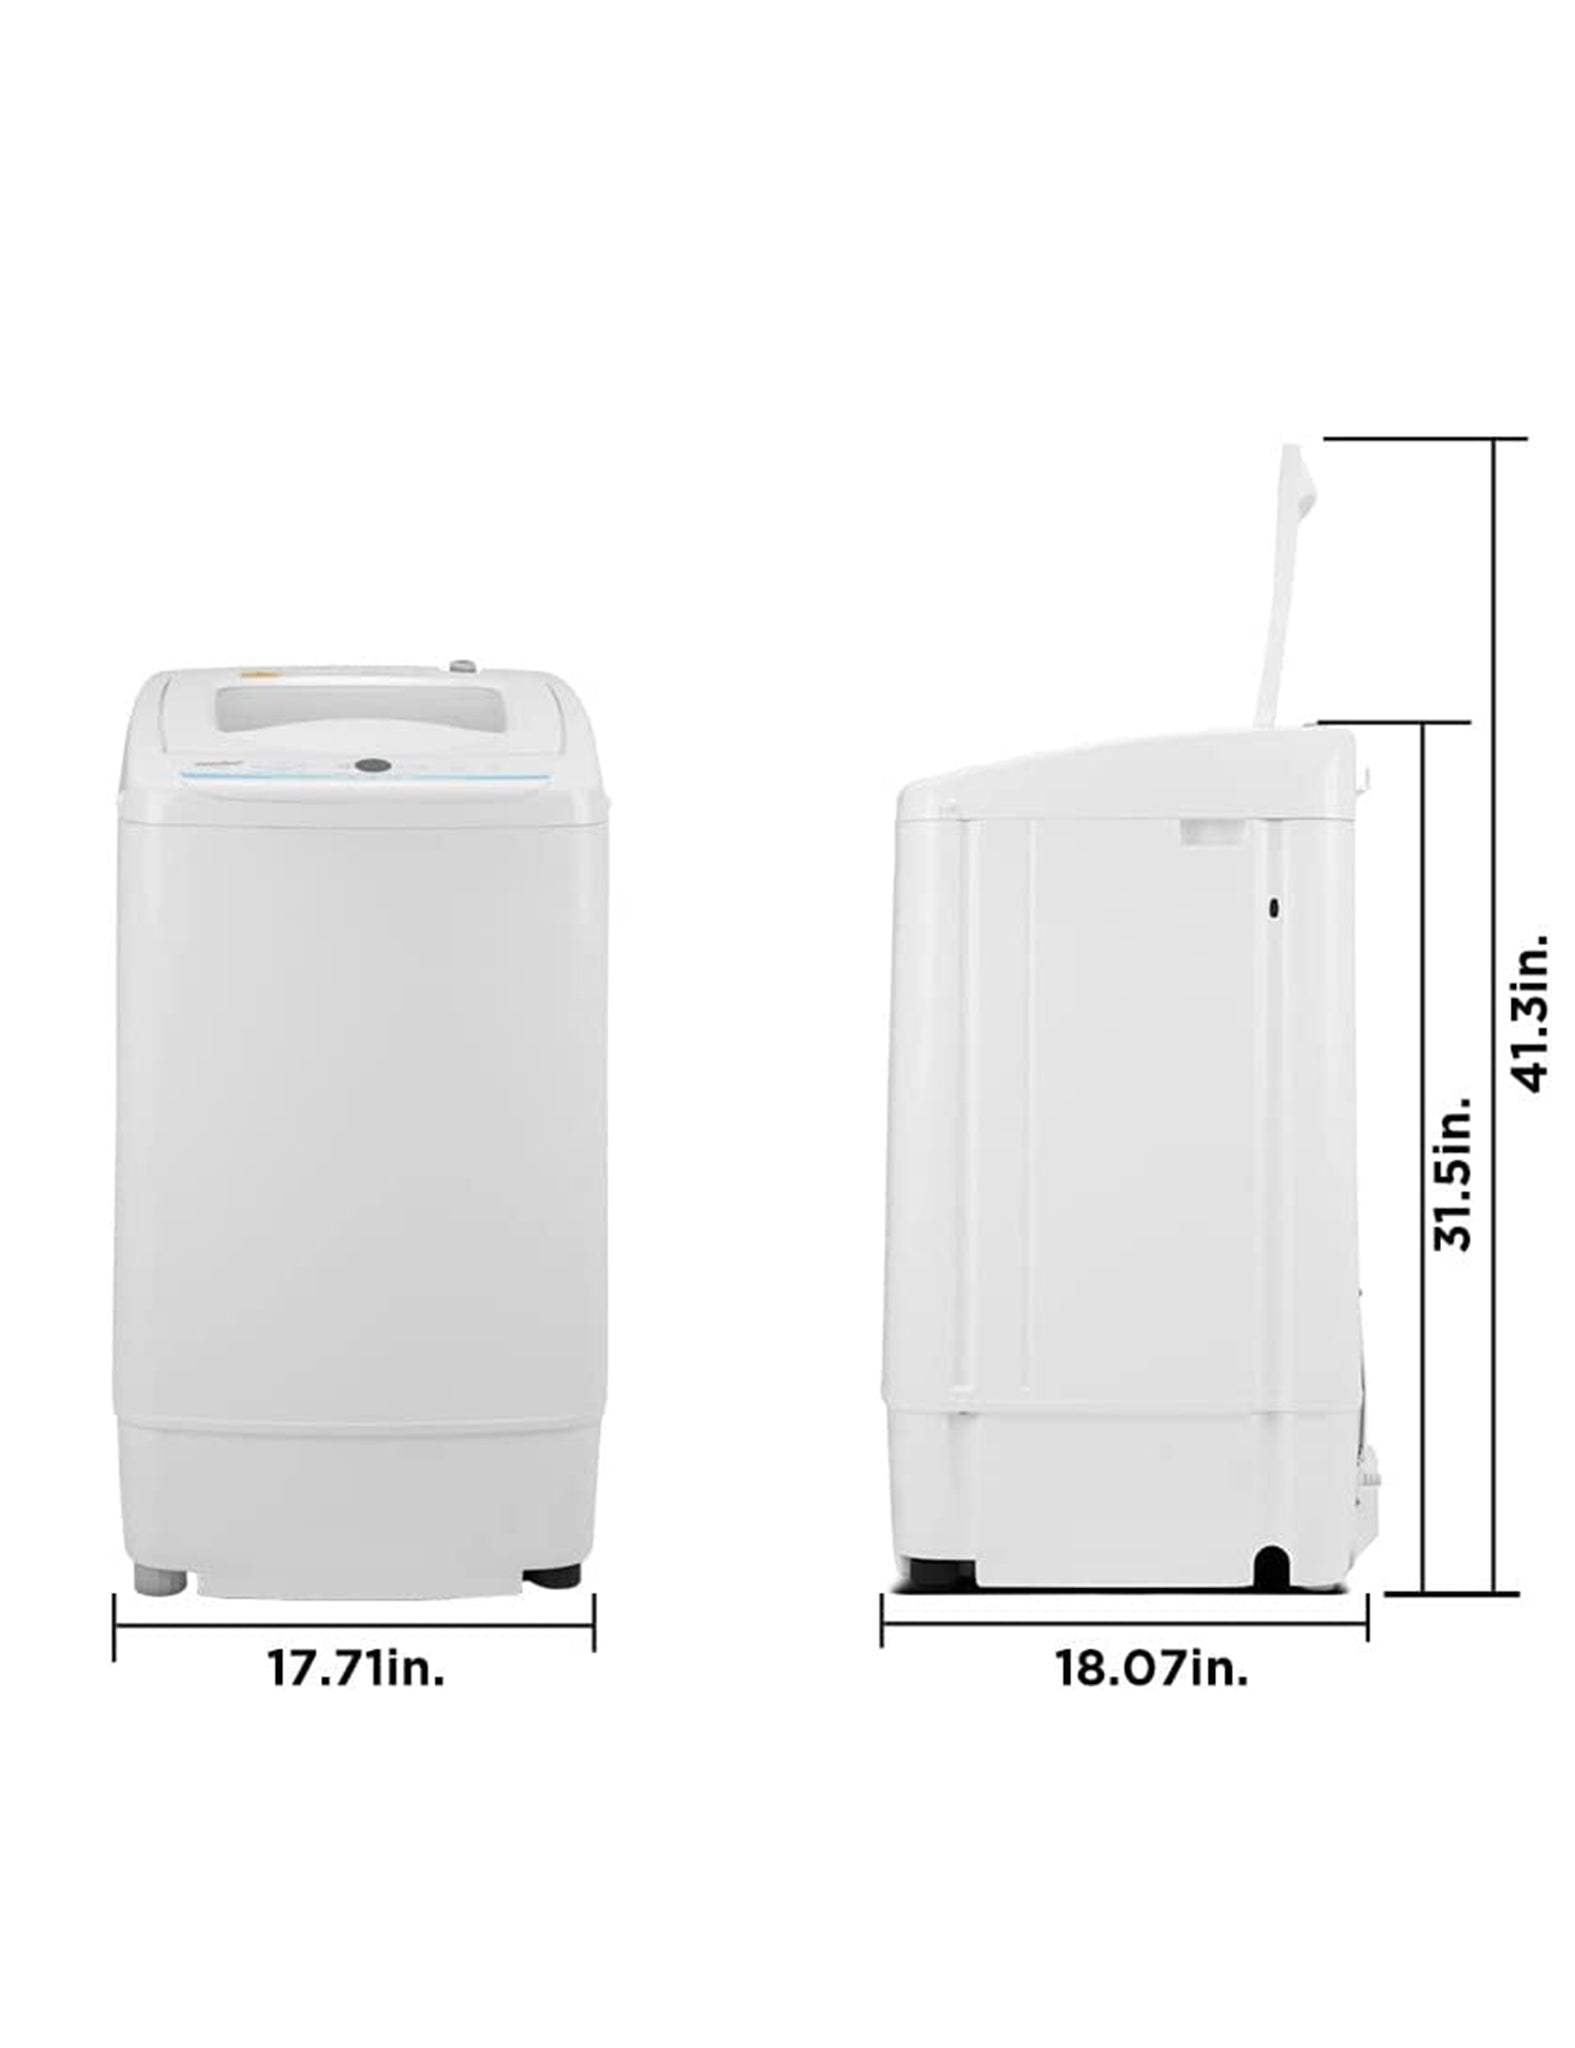 size dimensions of portable washing machine